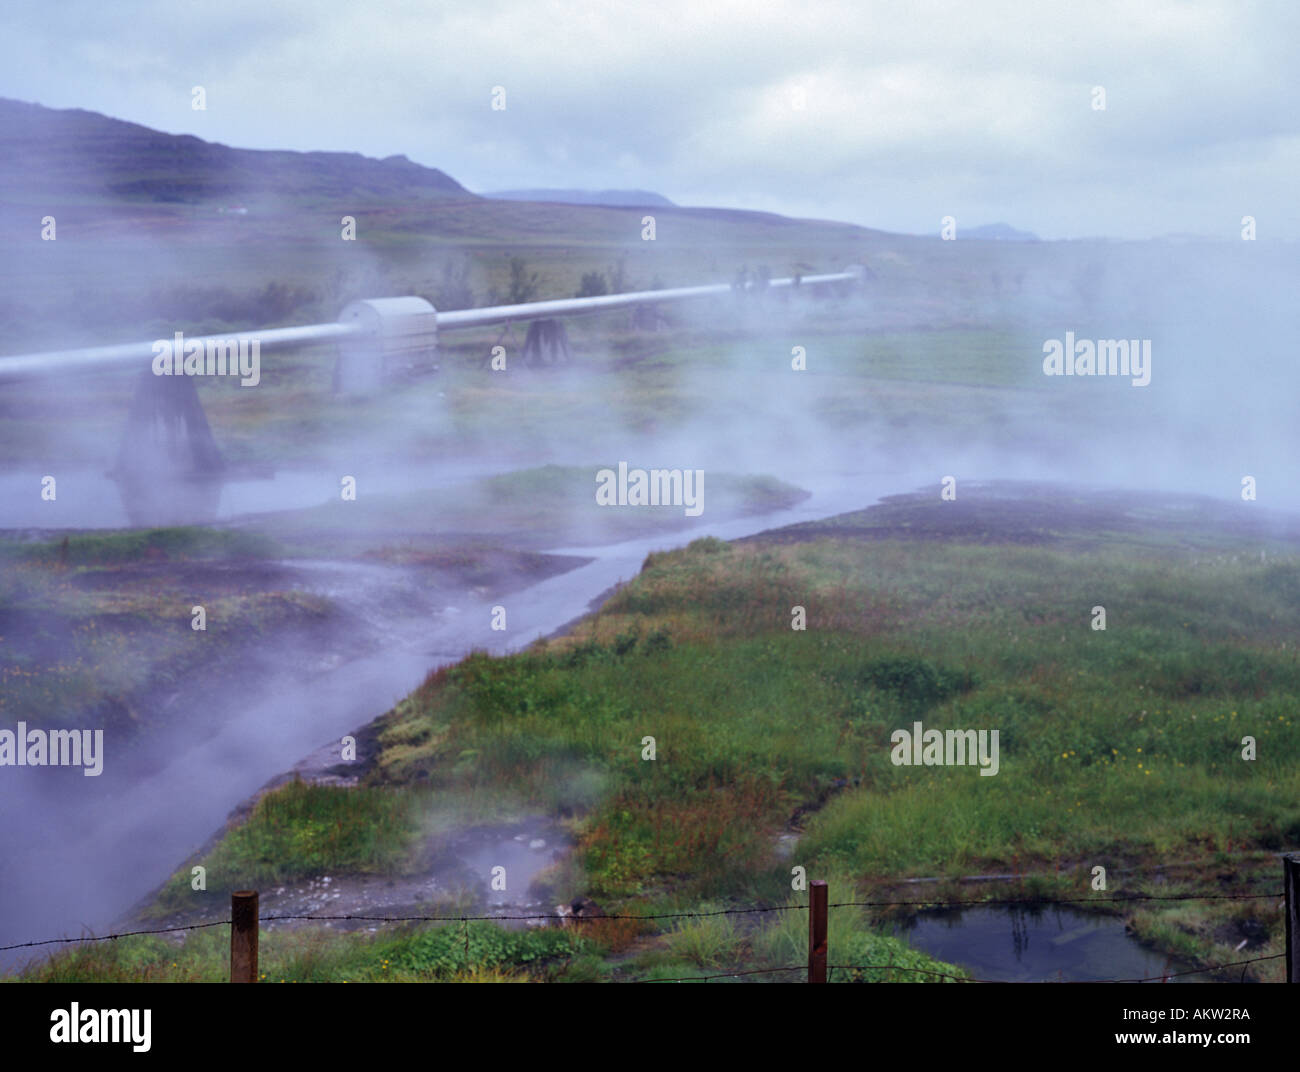 Deildartunguhver Iceland Steaming landscape from hot spring and water pipes carring geothermically heated hot water to Borgarnes Stock Photo